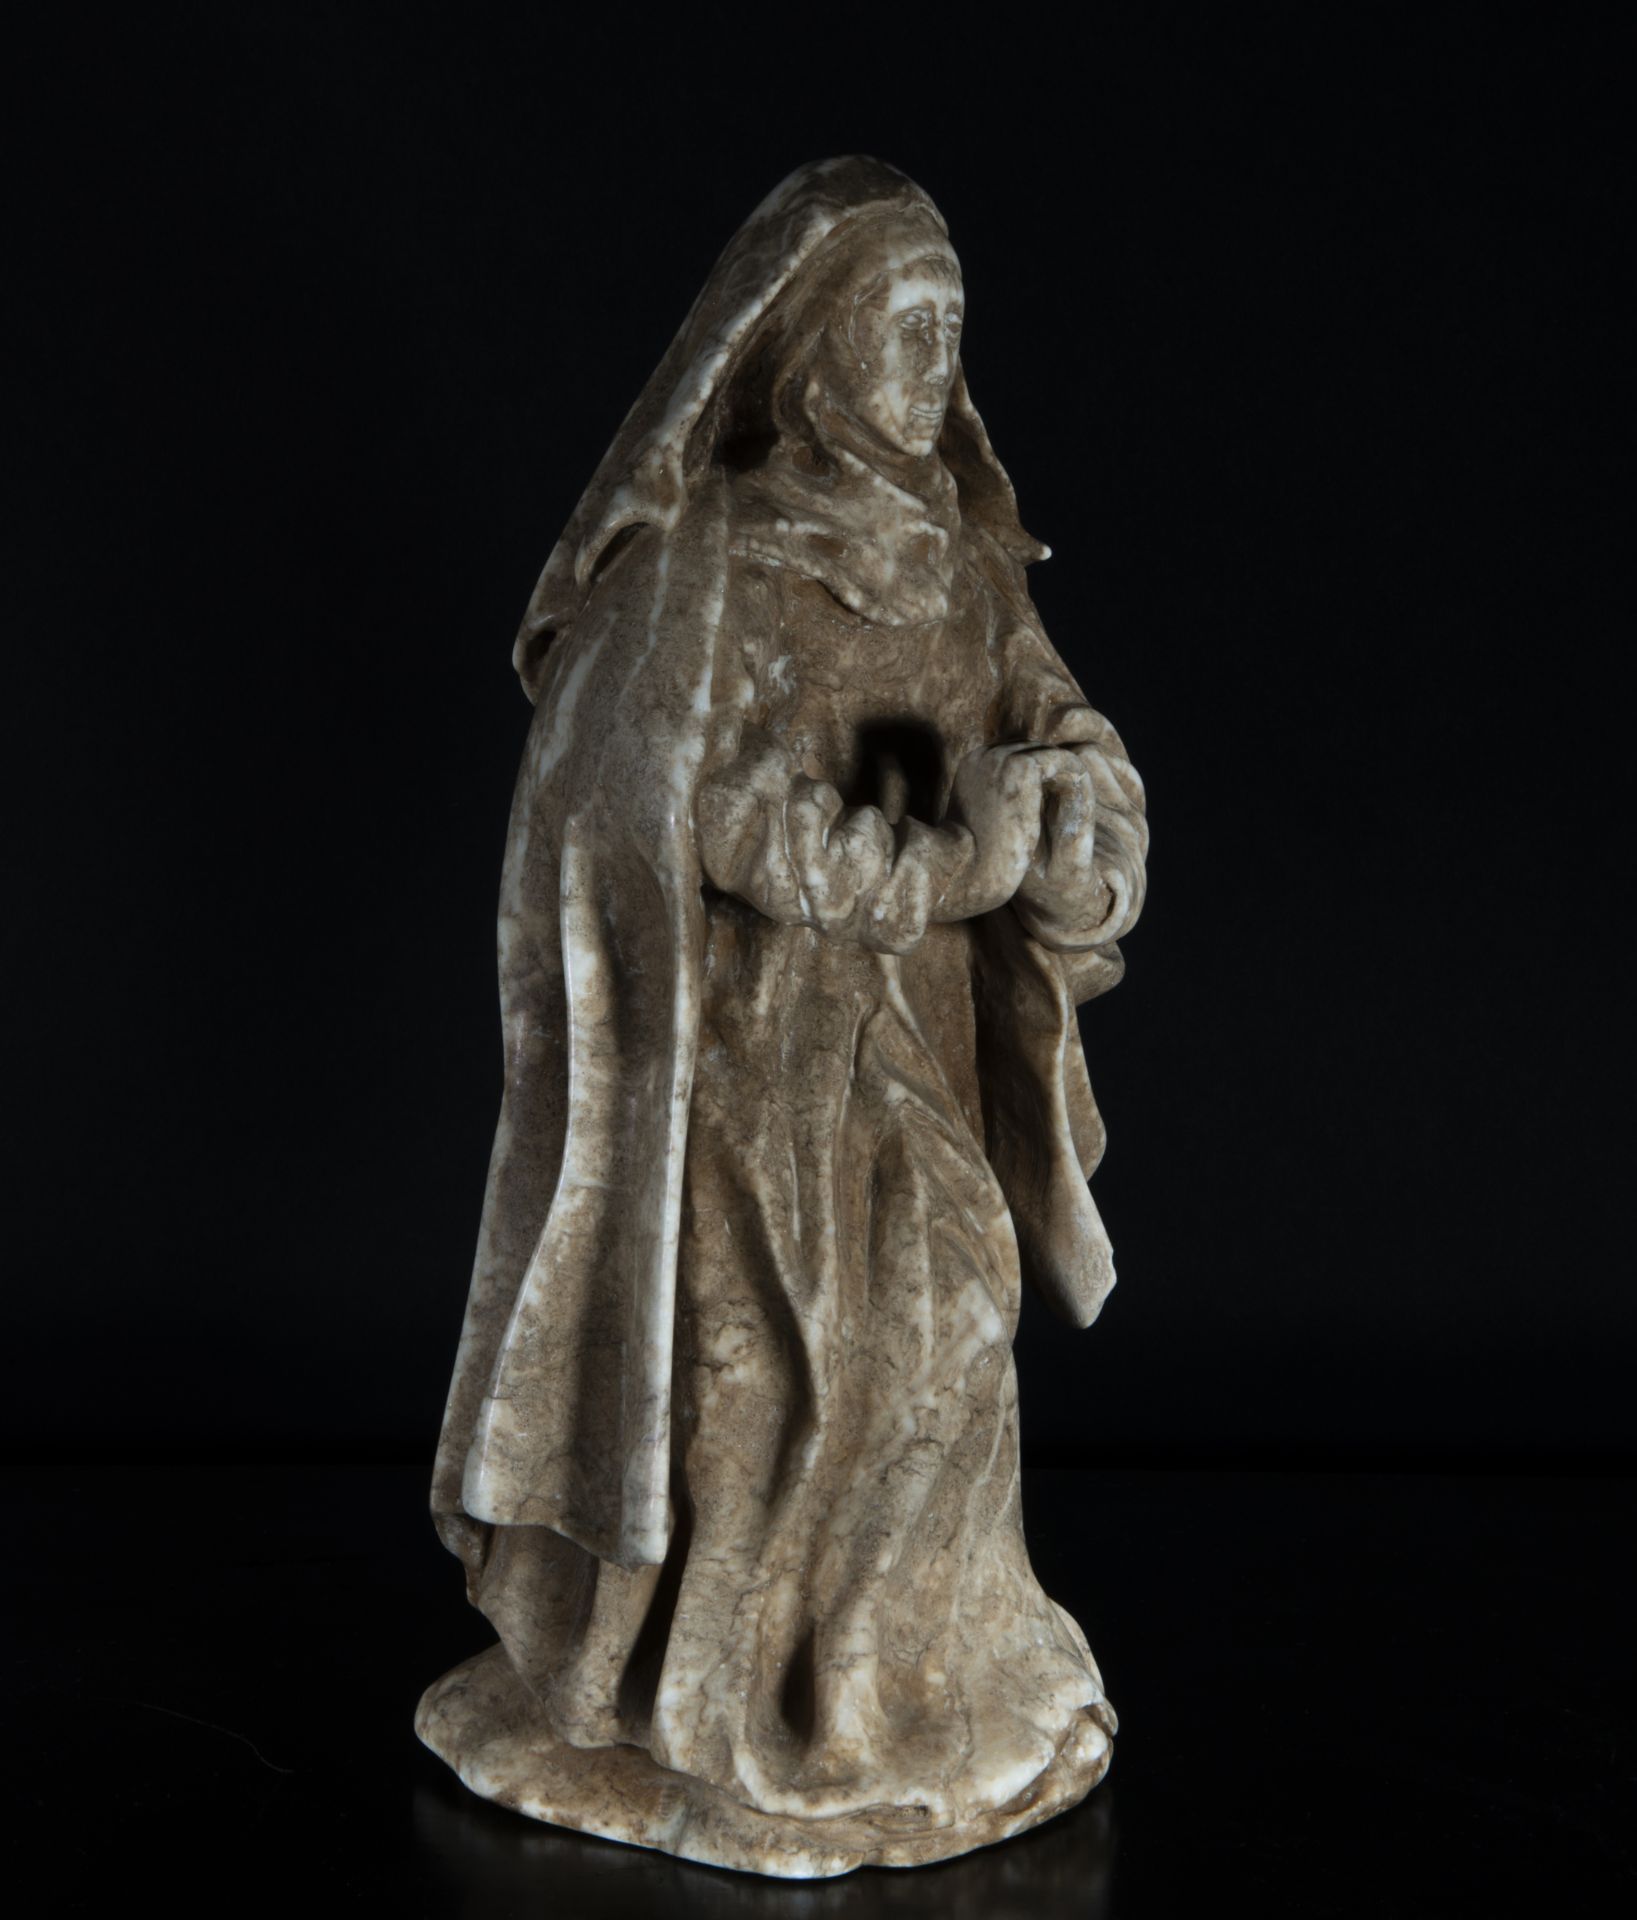 Portuguese Virgin in Alabaster carving, possibly 17th century, Portuguese work - Image 4 of 4